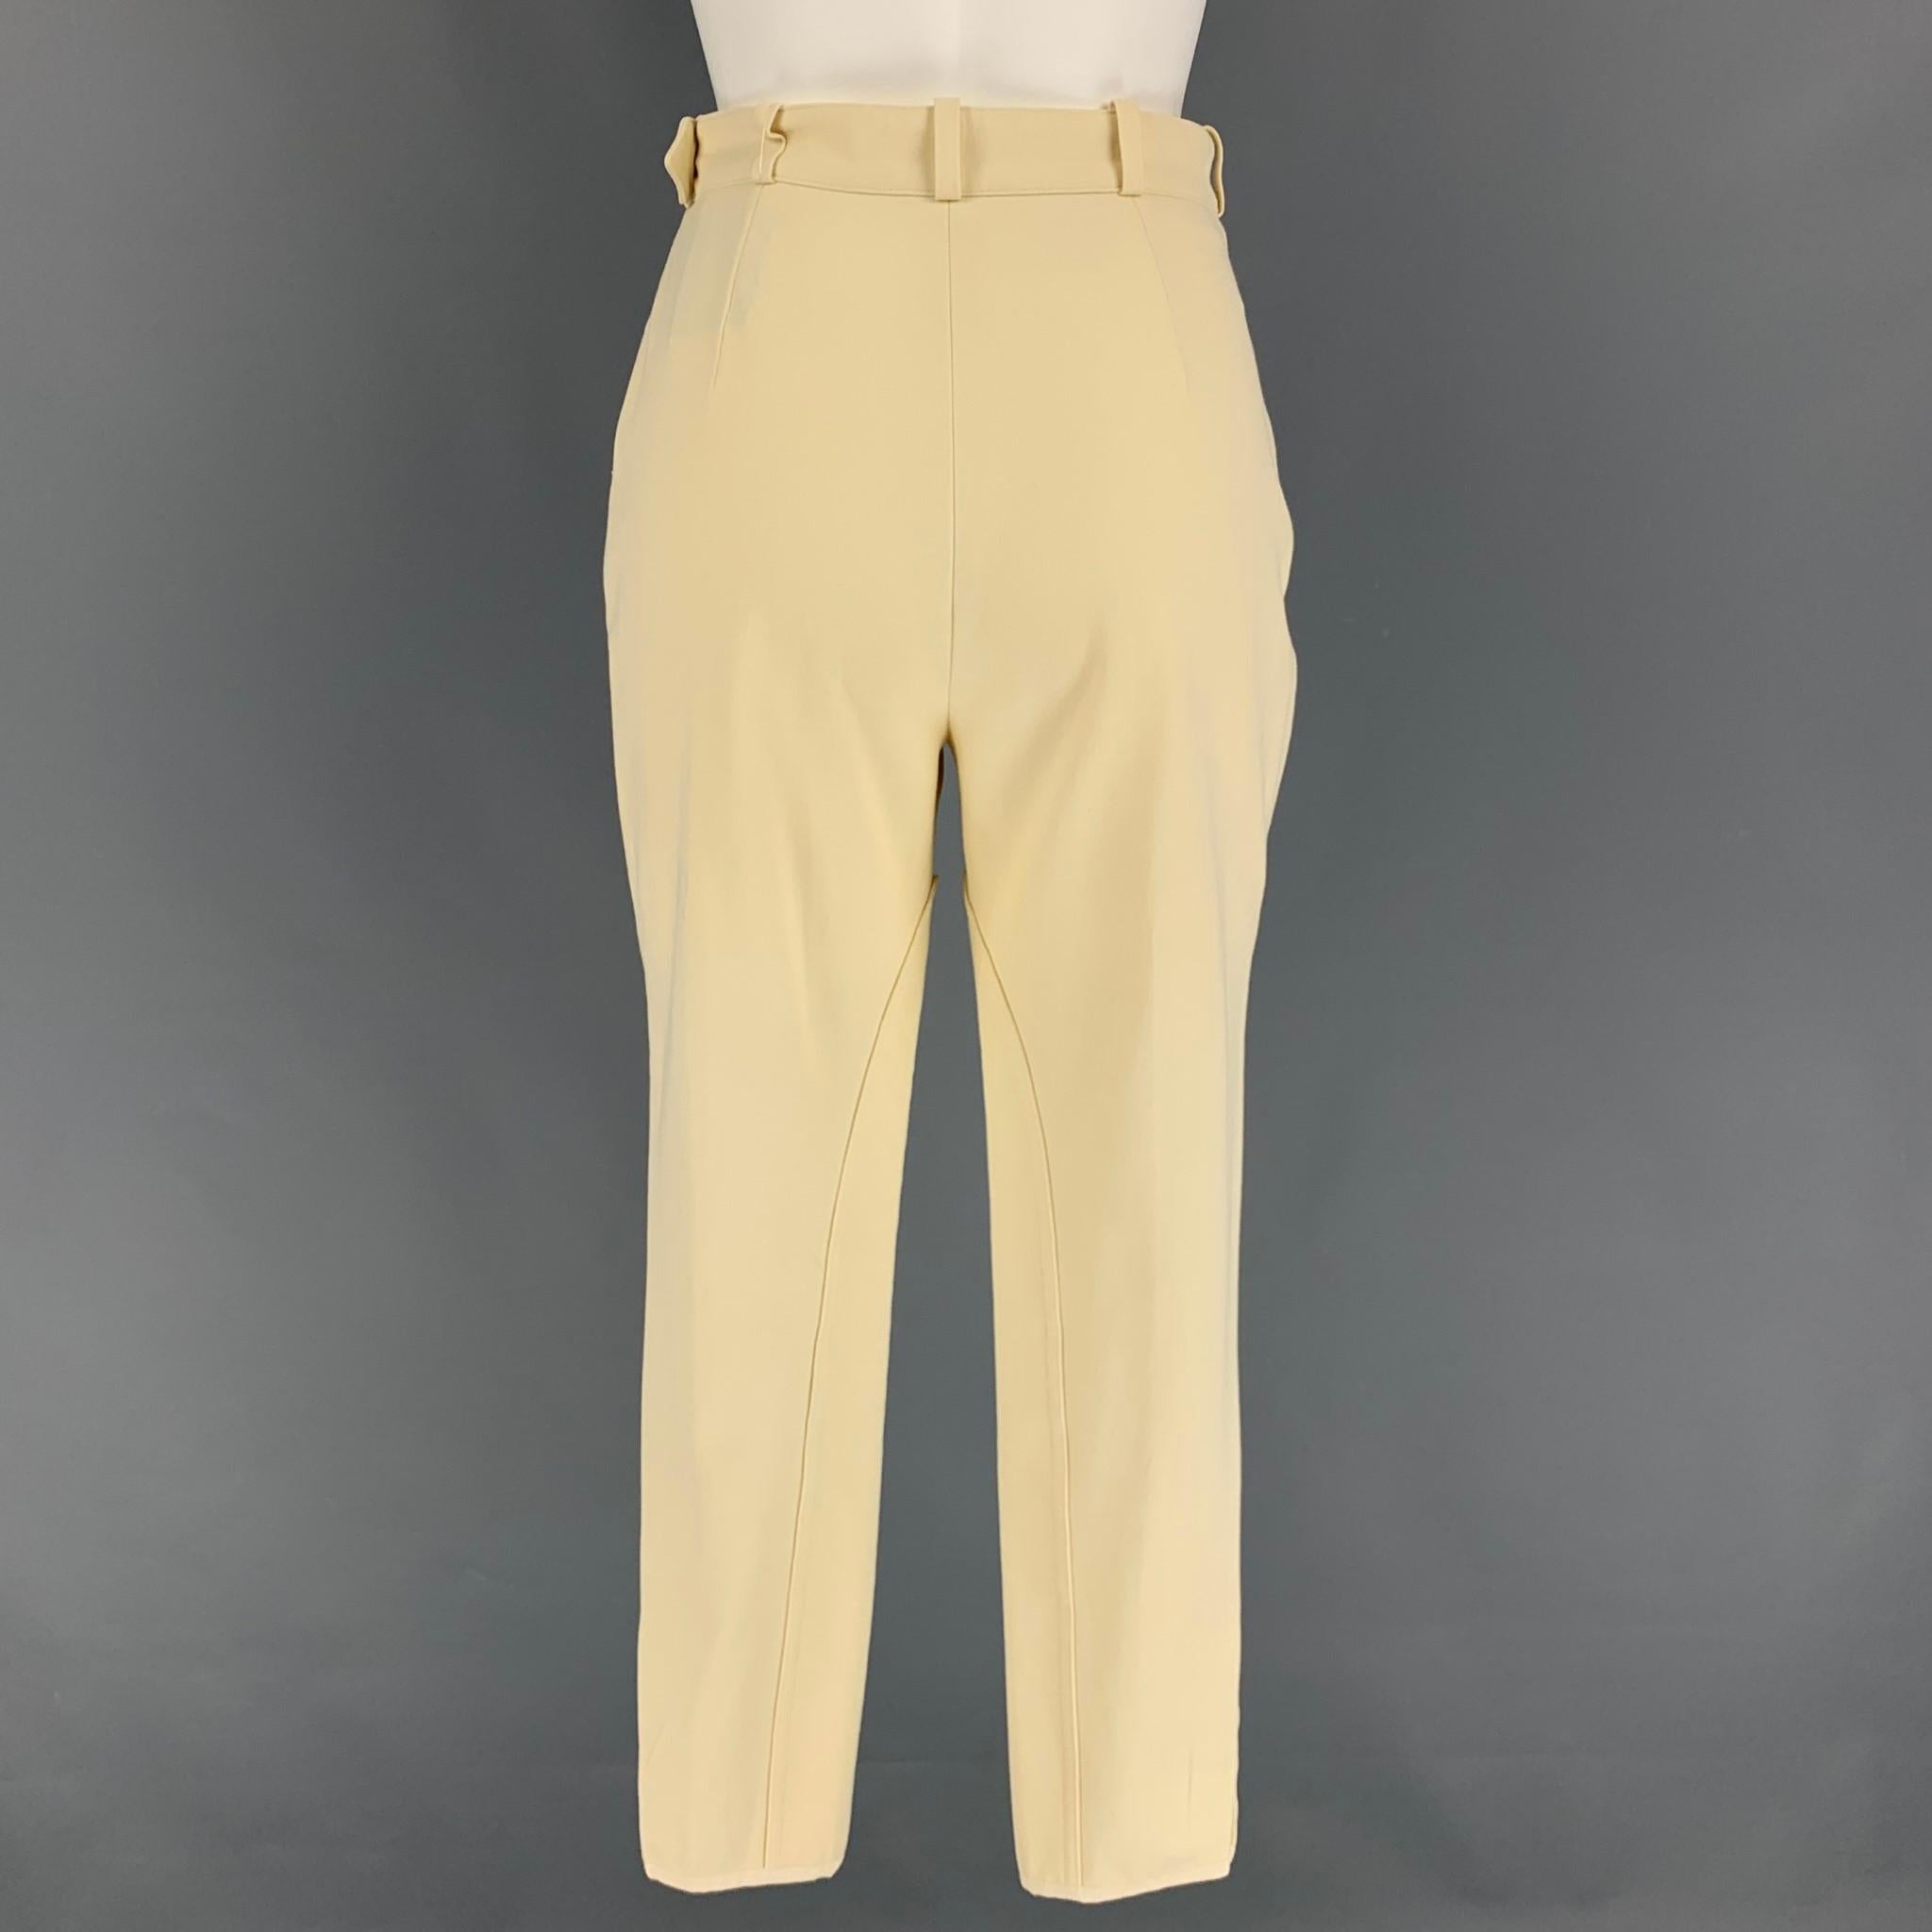 Vintage HERMES casual pants comes in a cream cotton featuring a jodhpurs style, gold tone hardware, gold tone buttons, front zipper pockets, belt loops, and a side zipper closure. Made in France. 

Very Good Pre-Owned Condition.
Marked: